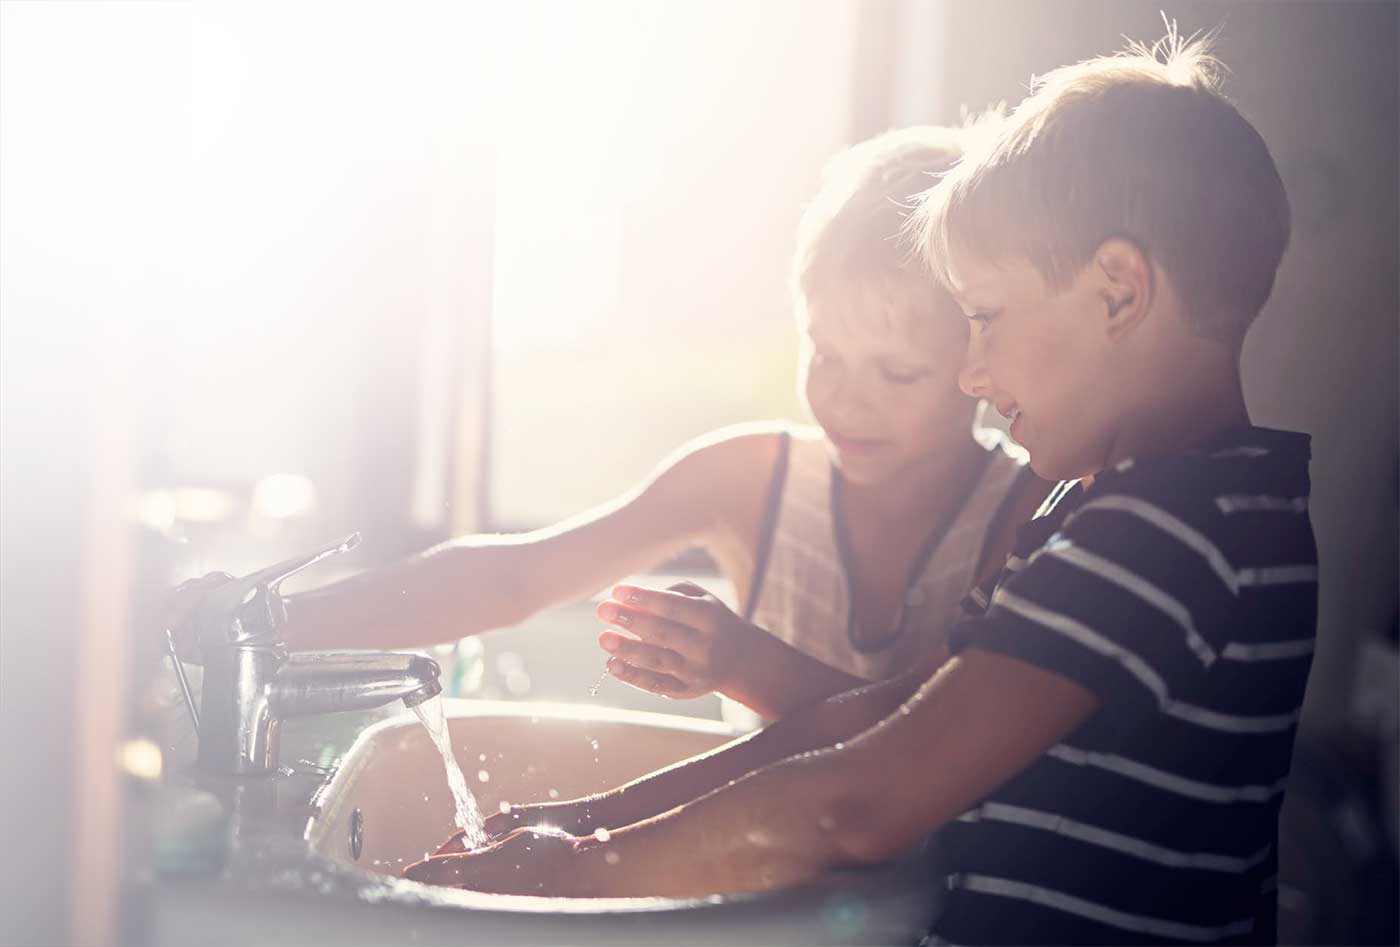 Two young boys washing their hands in a sink.